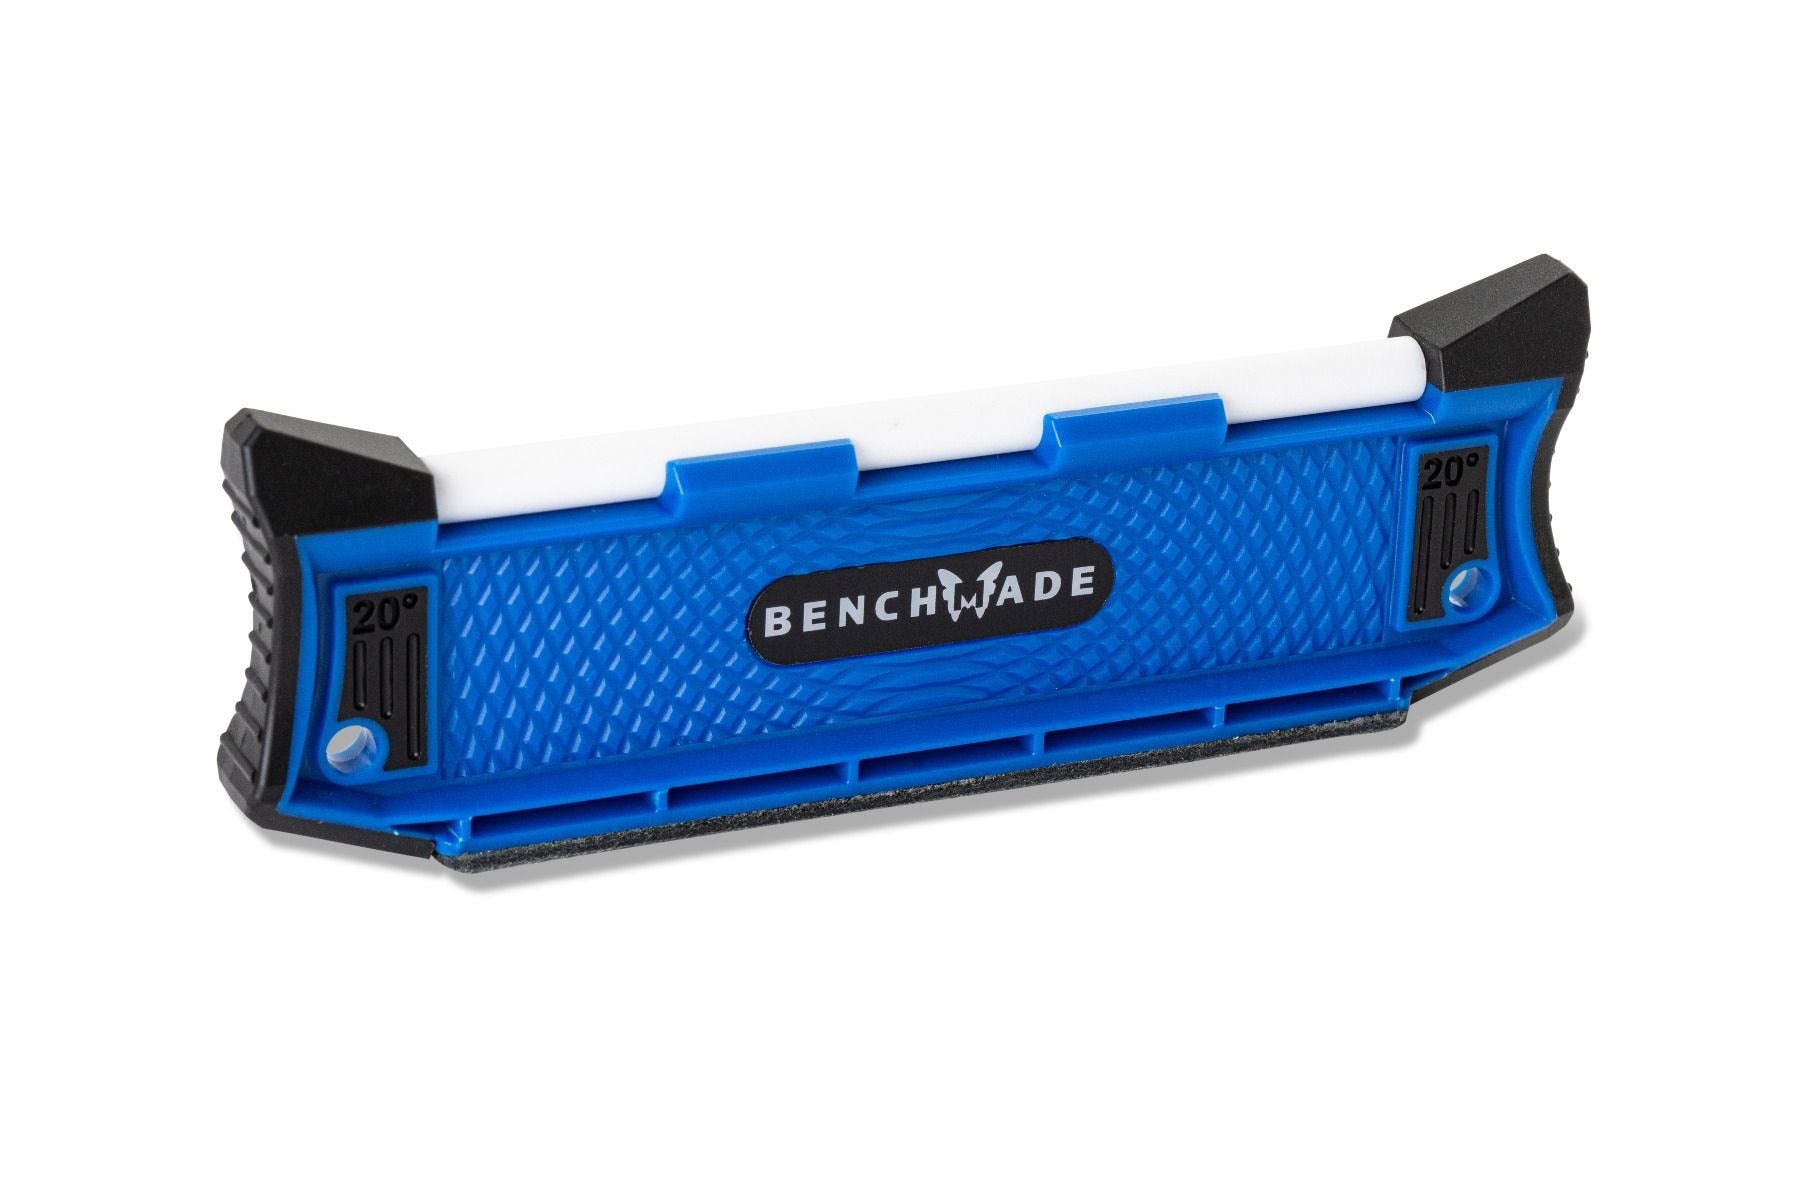 Benchmade 20° GUIDED HONE TOOL | 50080